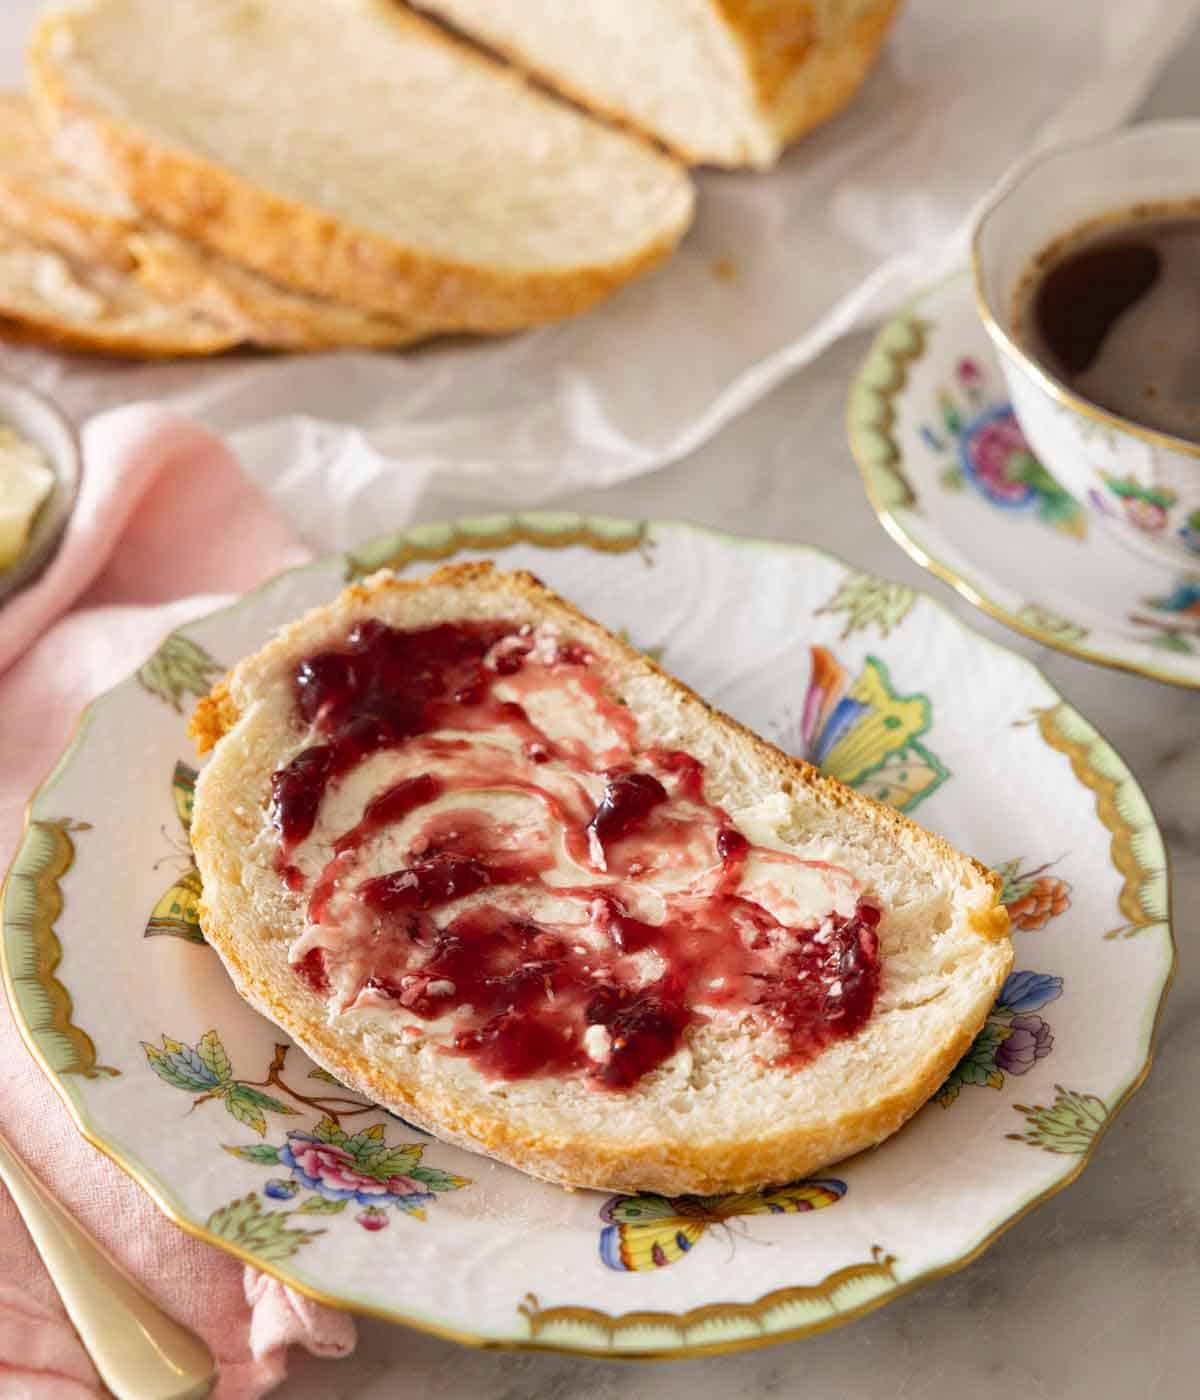 A plate with a slice of artisan bread with butter and jam spread over.